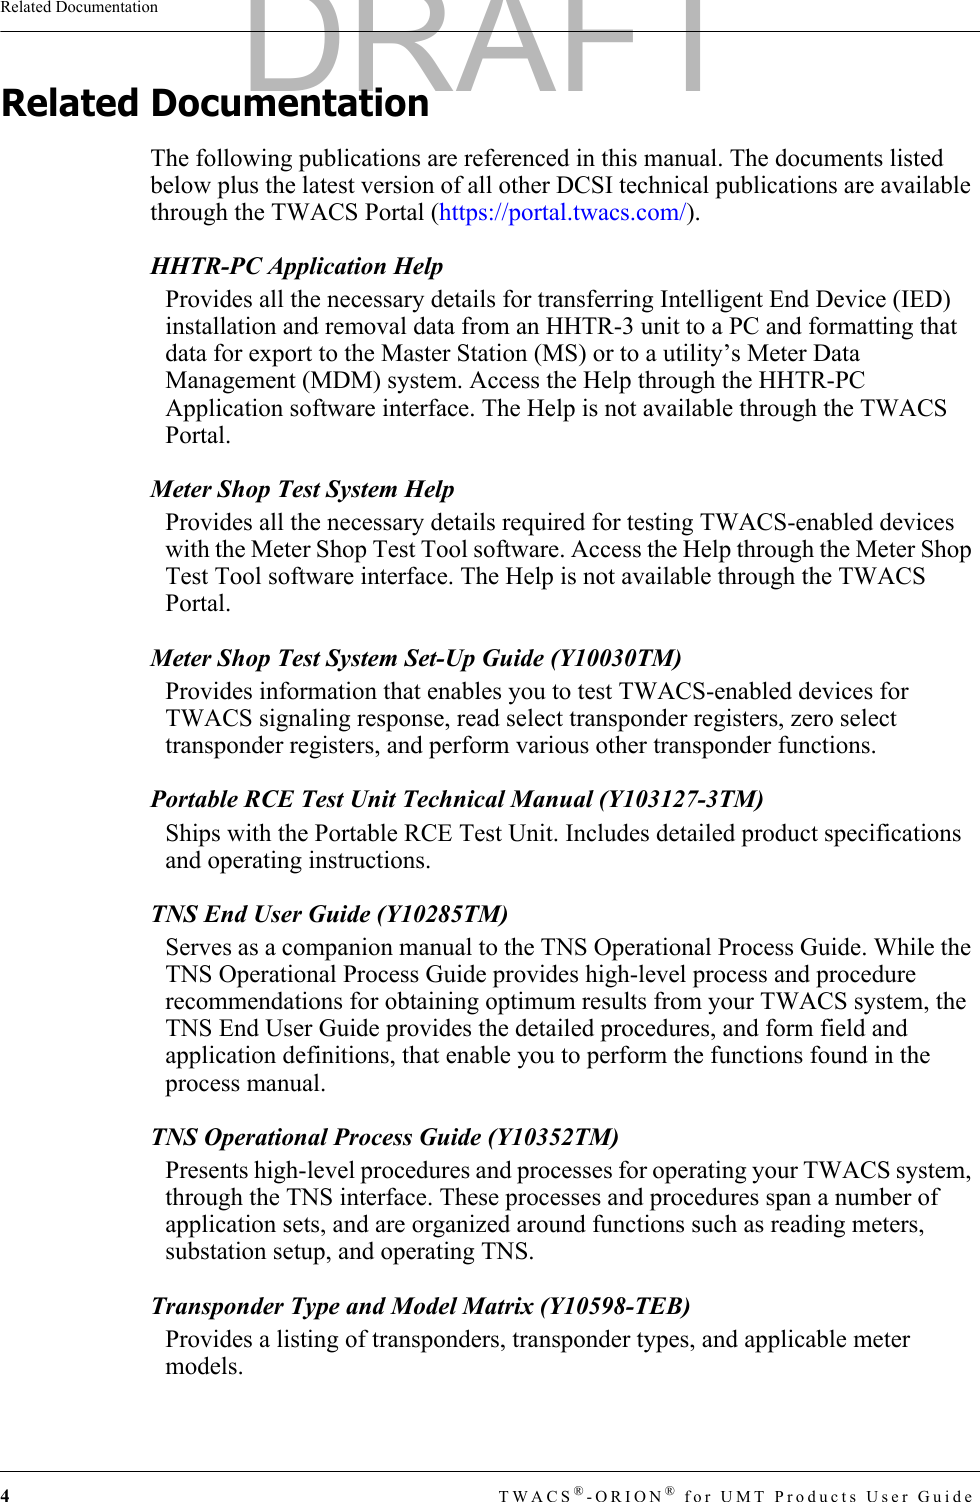 4TWACS®-ORION® for UMT Products User GuideRelated DocumentationRelated DocumentationThe following publications are referenced in this manual. The documents listed below plus the latest version of all other DCSI technical publications are available through the TWACS Portal (https://portal.twacs.com/).HHTR-PC Application HelpProvides all the necessary details for transferring Intelligent End Device (IED) installation and removal data from an HHTR-3 unit to a PC and formatting that data for export to the Master Station (MS) or to a utility’s Meter Data Management (MDM) system. Access the Help through the HHTR-PC Application software interface. The Help is not available through the TWACS Portal.Meter Shop Test System HelpProvides all the necessary details required for testing TWACS-enabled devices with the Meter Shop Test Tool software. Access the Help through the Meter Shop Test Tool software interface. The Help is not available through the TWACS Portal.Meter Shop Test System Set-Up Guide (Y10030TM)Provides information that enables you to test TWACS-enabled devices for TWACS signaling response, read select transponder registers, zero select transponder registers, and perform various other transponder functions.Portable RCE Test Unit Technical Manual (Y103127-3TM)Ships with the Portable RCE Test Unit. Includes detailed product specifications and operating instructions.TNS End User Guide (Y10285TM)Serves as a companion manual to the TNS Operational Process Guide. While the TNS Operational Process Guide provides high-level process and procedure recommendations for obtaining optimum results from your TWACS system, the TNS End User Guide provides the detailed procedures, and form field and application definitions, that enable you to perform the functions found in the process manual.TNS Operational Process Guide (Y10352TM)Presents high-level procedures and processes for operating your TWACS system, through the TNS interface. These processes and procedures span a number of application sets, and are organized around functions such as reading meters, substation setup, and operating TNS.Transponder Type and Model Matrix (Y10598-TEB)Provides a listing of transponders, transponder types, and applicable meter models.DRAFT